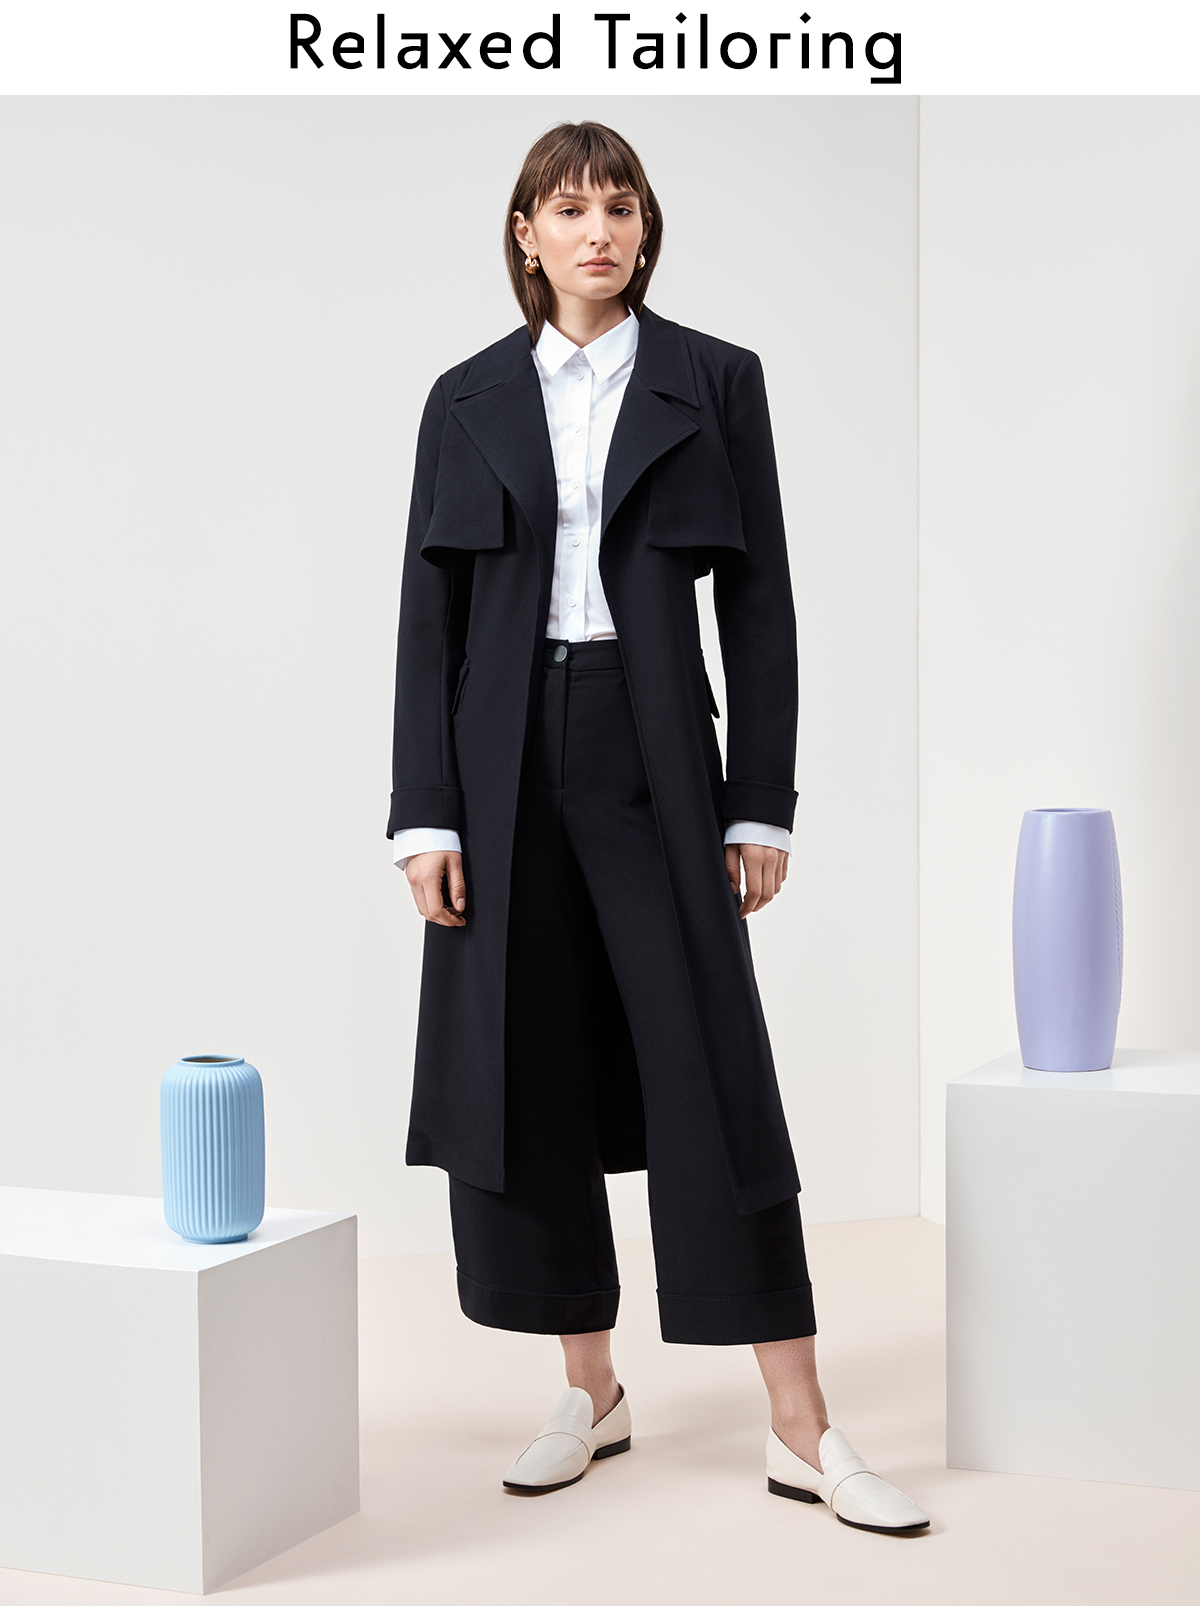 Relaxed Tailoring